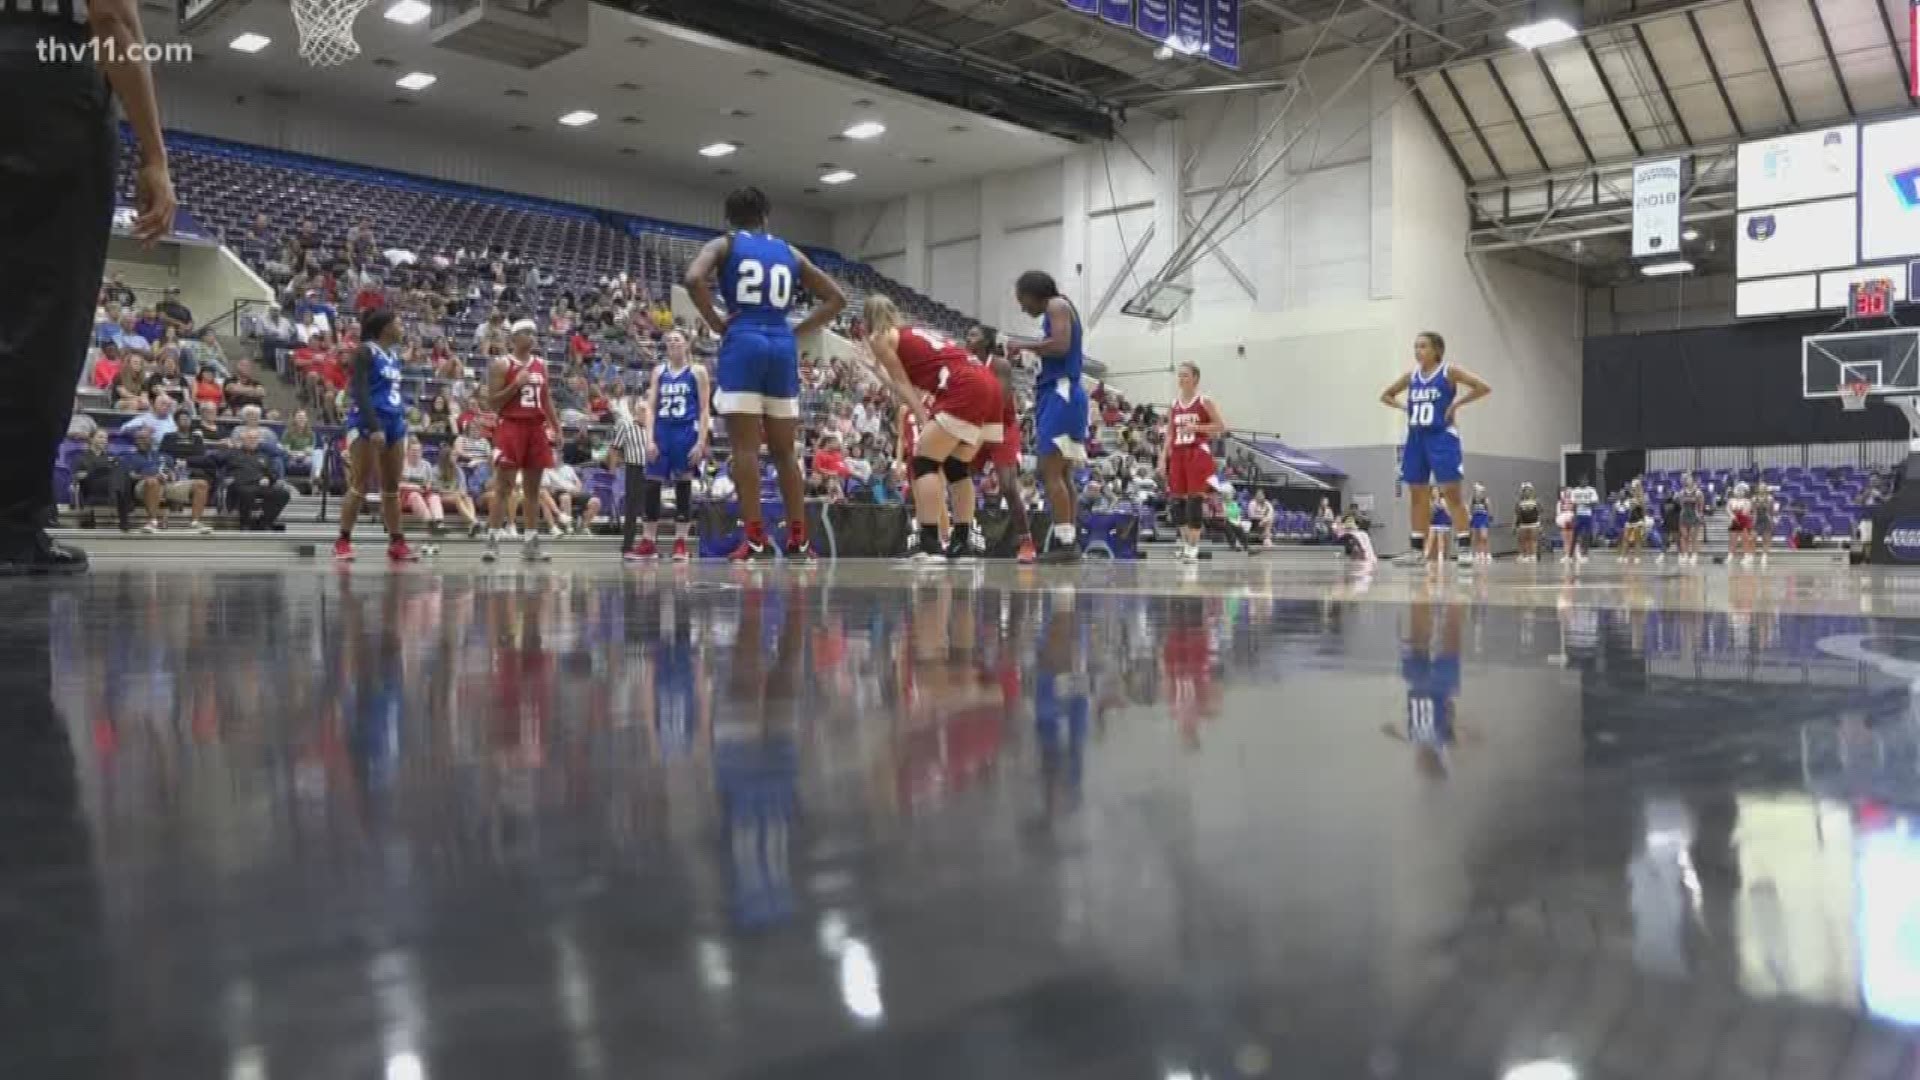 It was a two-point game late in the 4th quarter, but the East All-Stars pulled away from the West All-Stars down the stretch, 85-72, in the girls AAA All-Star game.